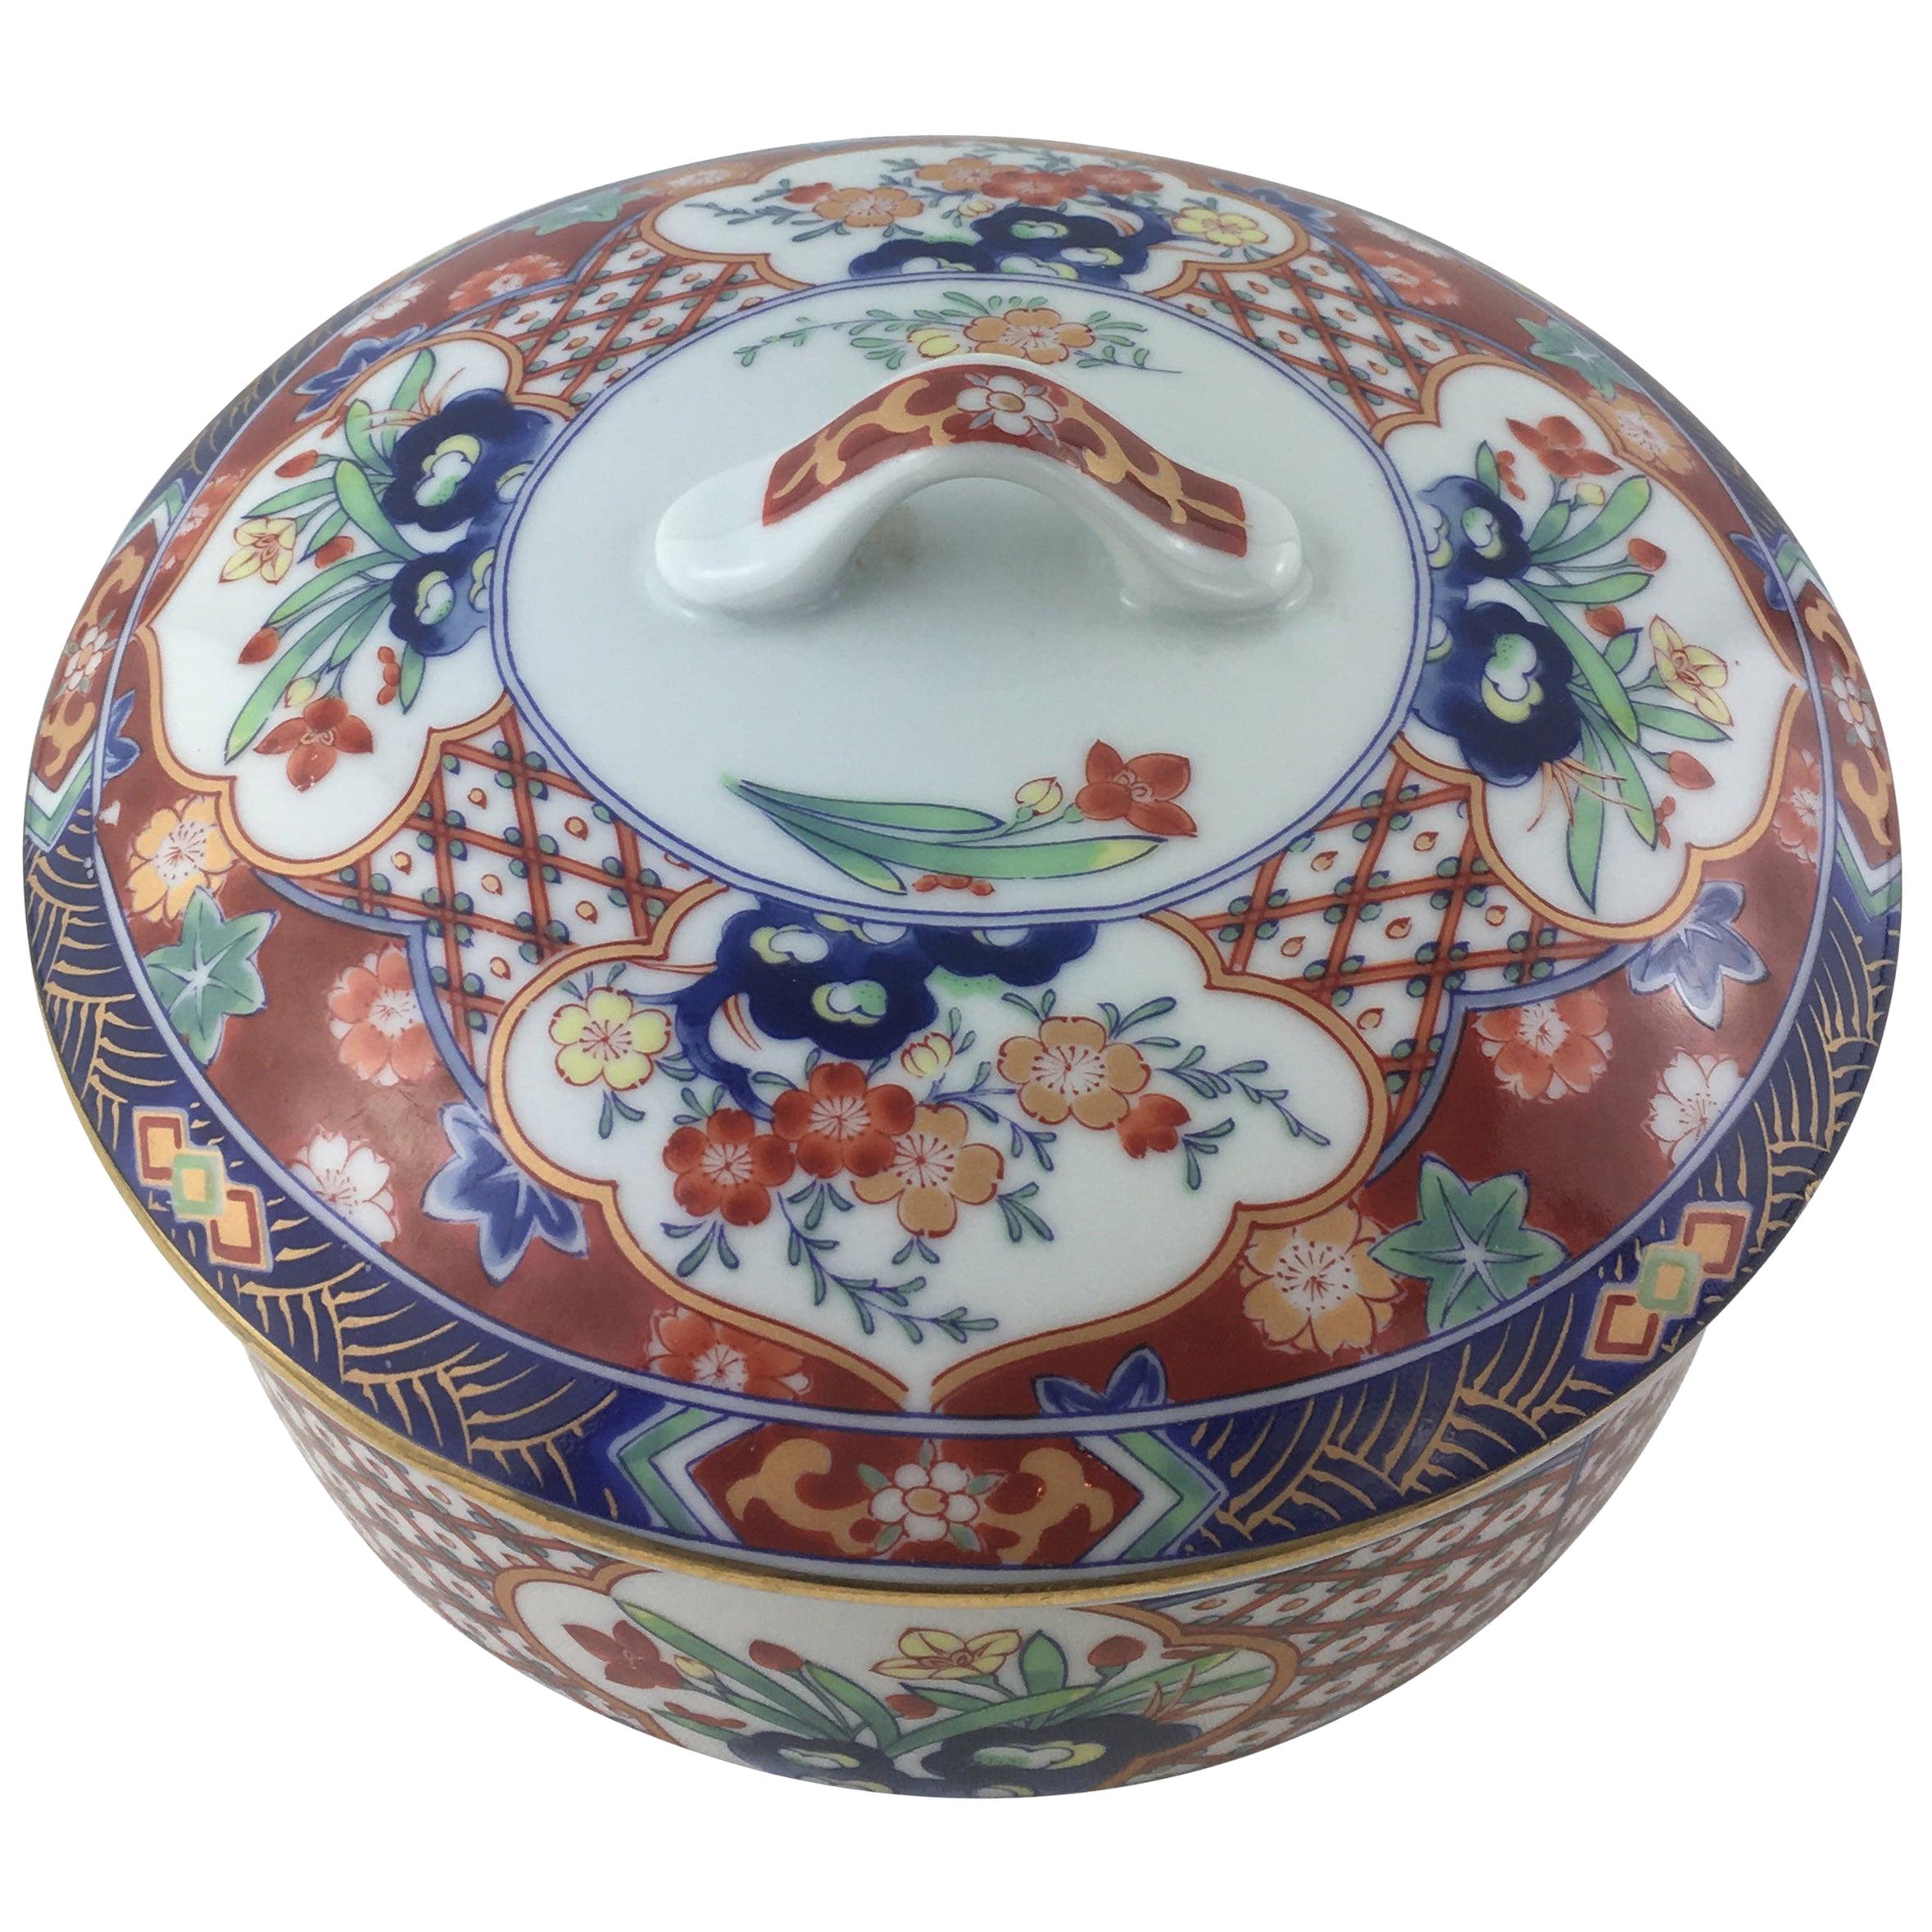 Japanese Hand-Painted Porcelain Lidded Serving Dish, Trinket or Jewelry Box